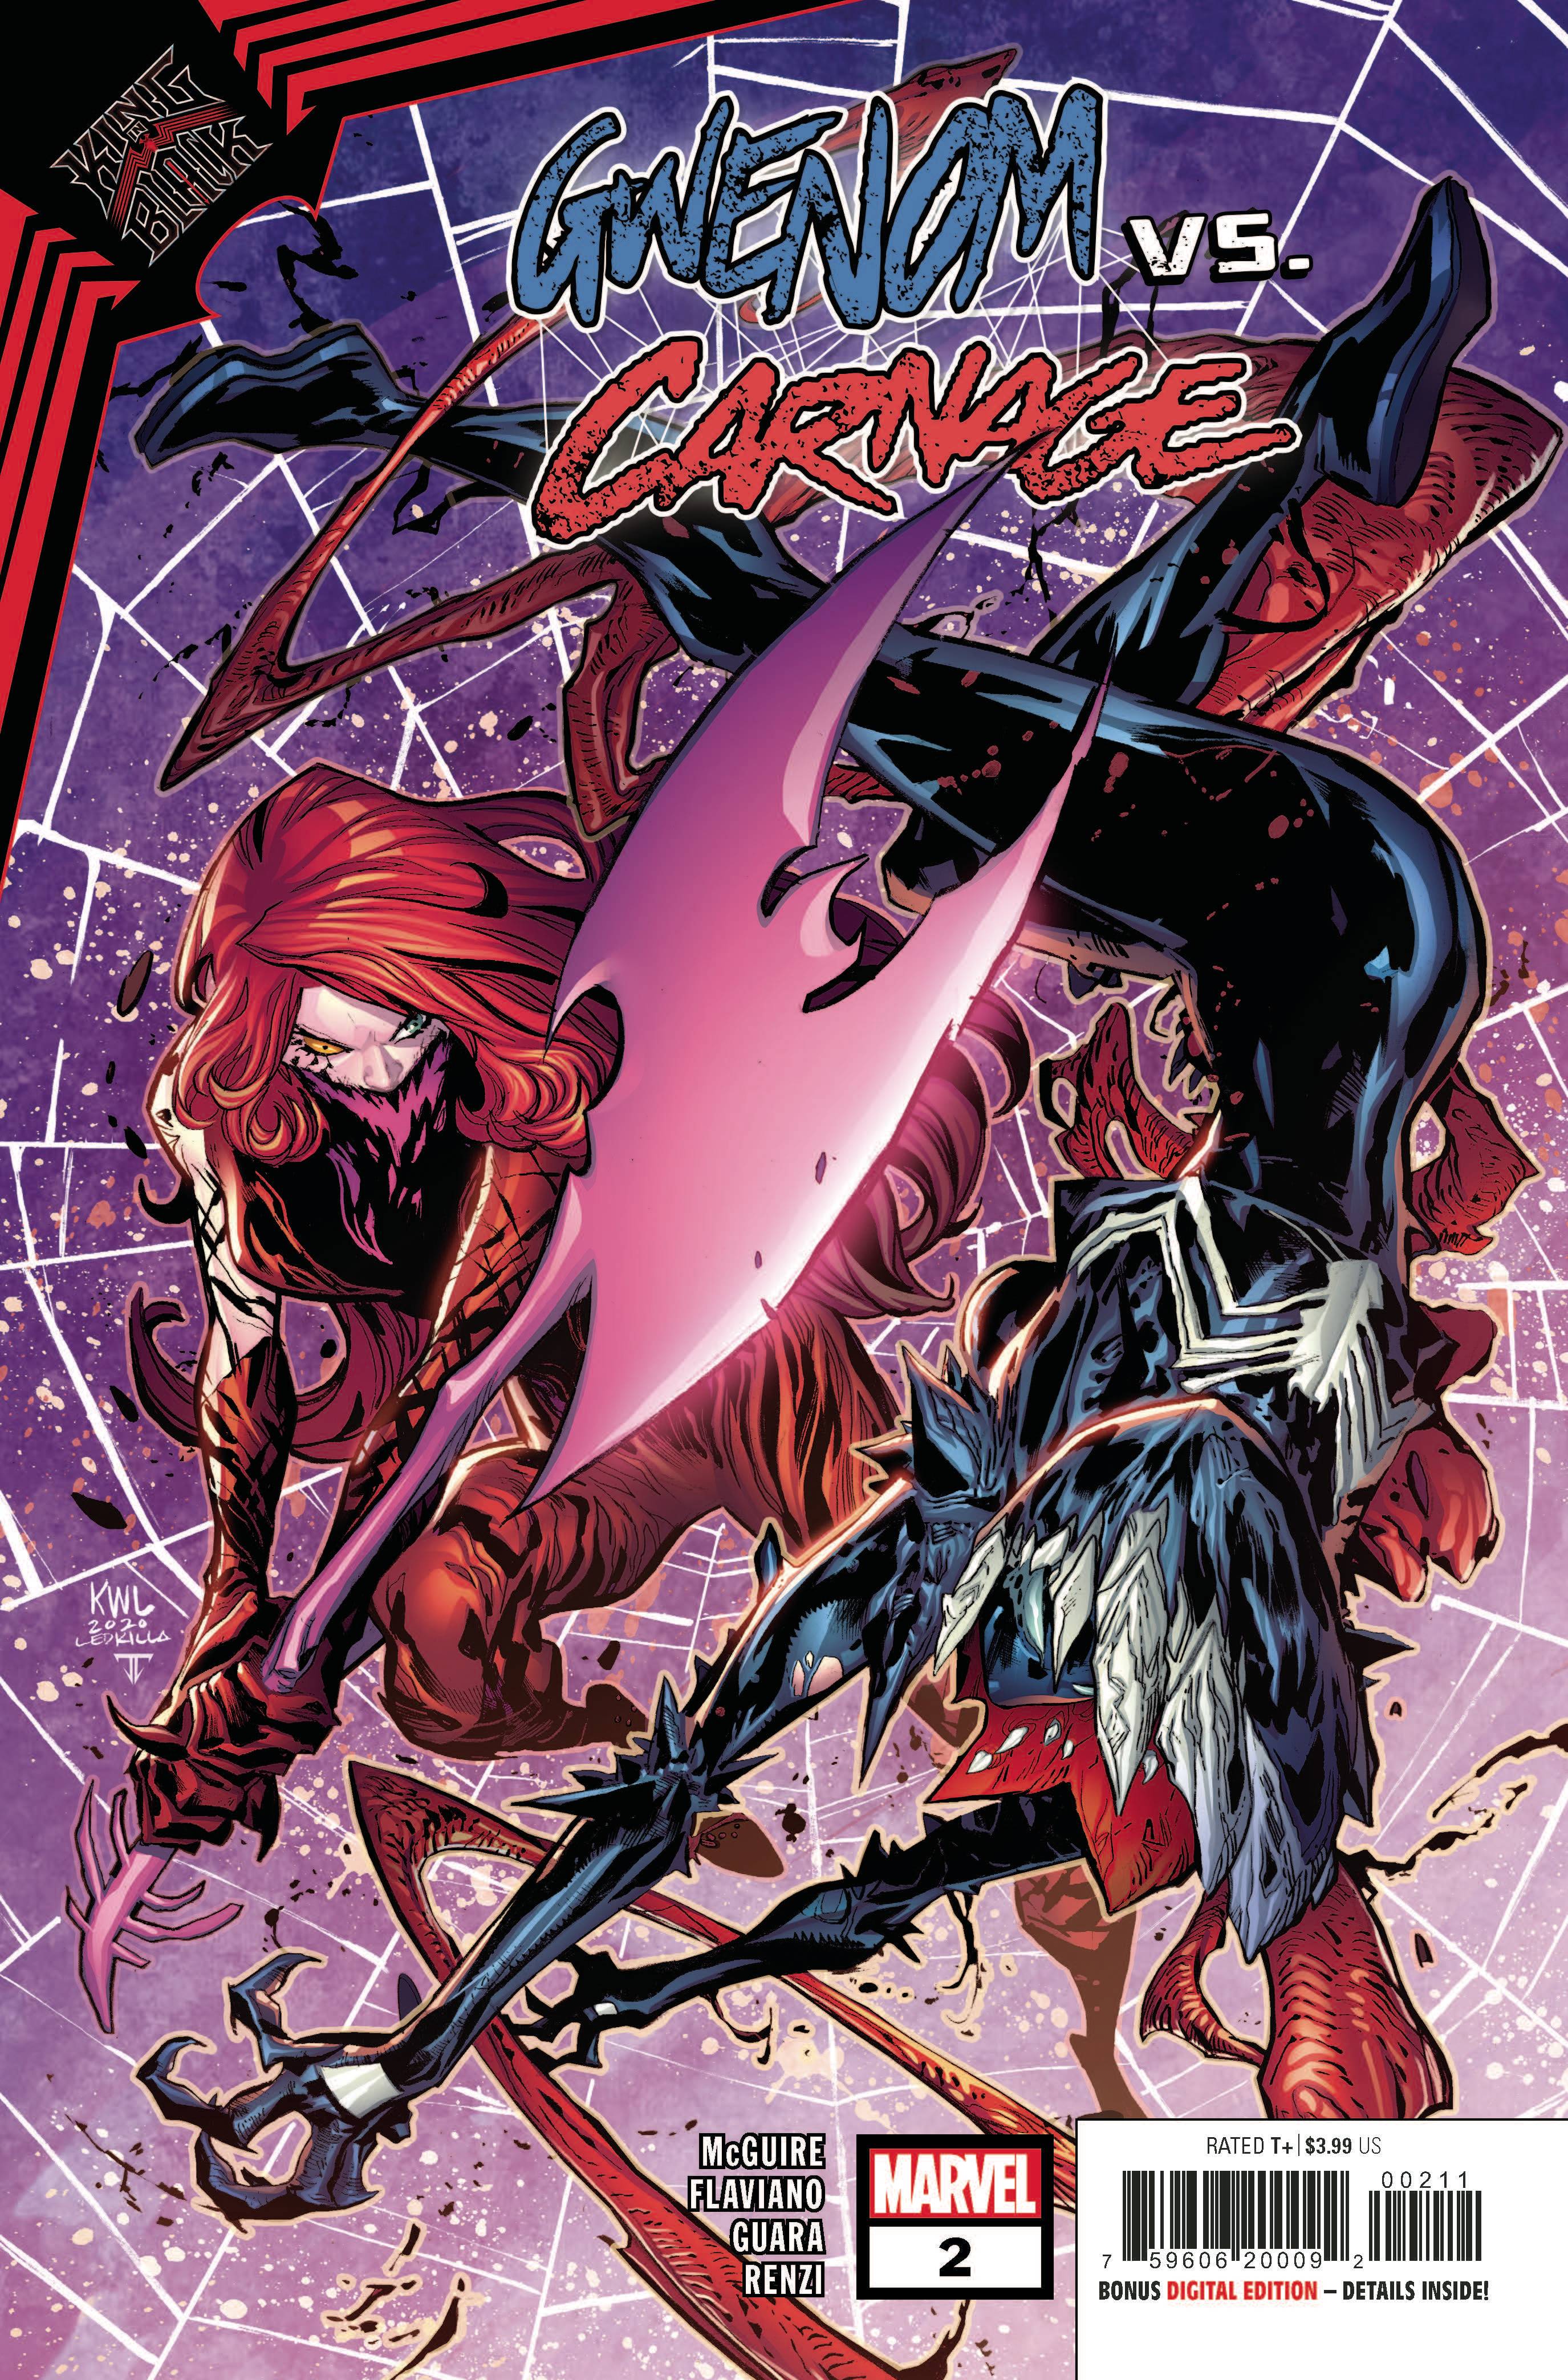 KING IN BLACK GWENOM VS CARNAGE #2 (OF 3) | L.A. Mood Comics and Games